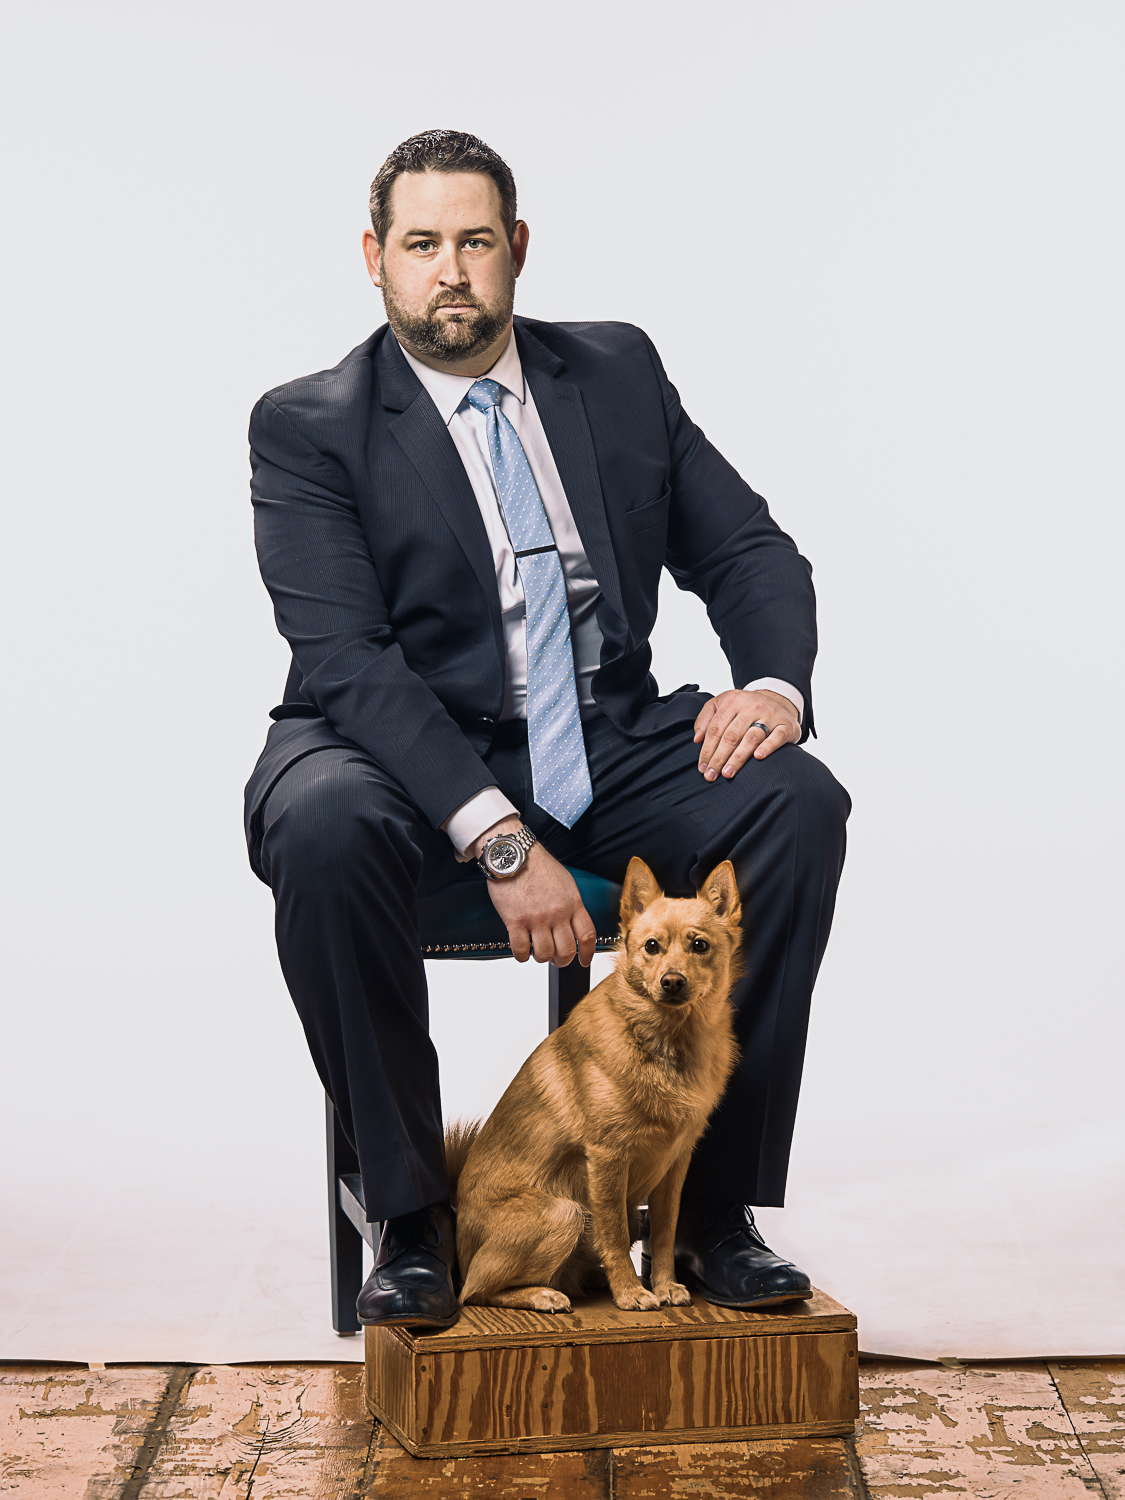 stoic portrait of business man and his dog